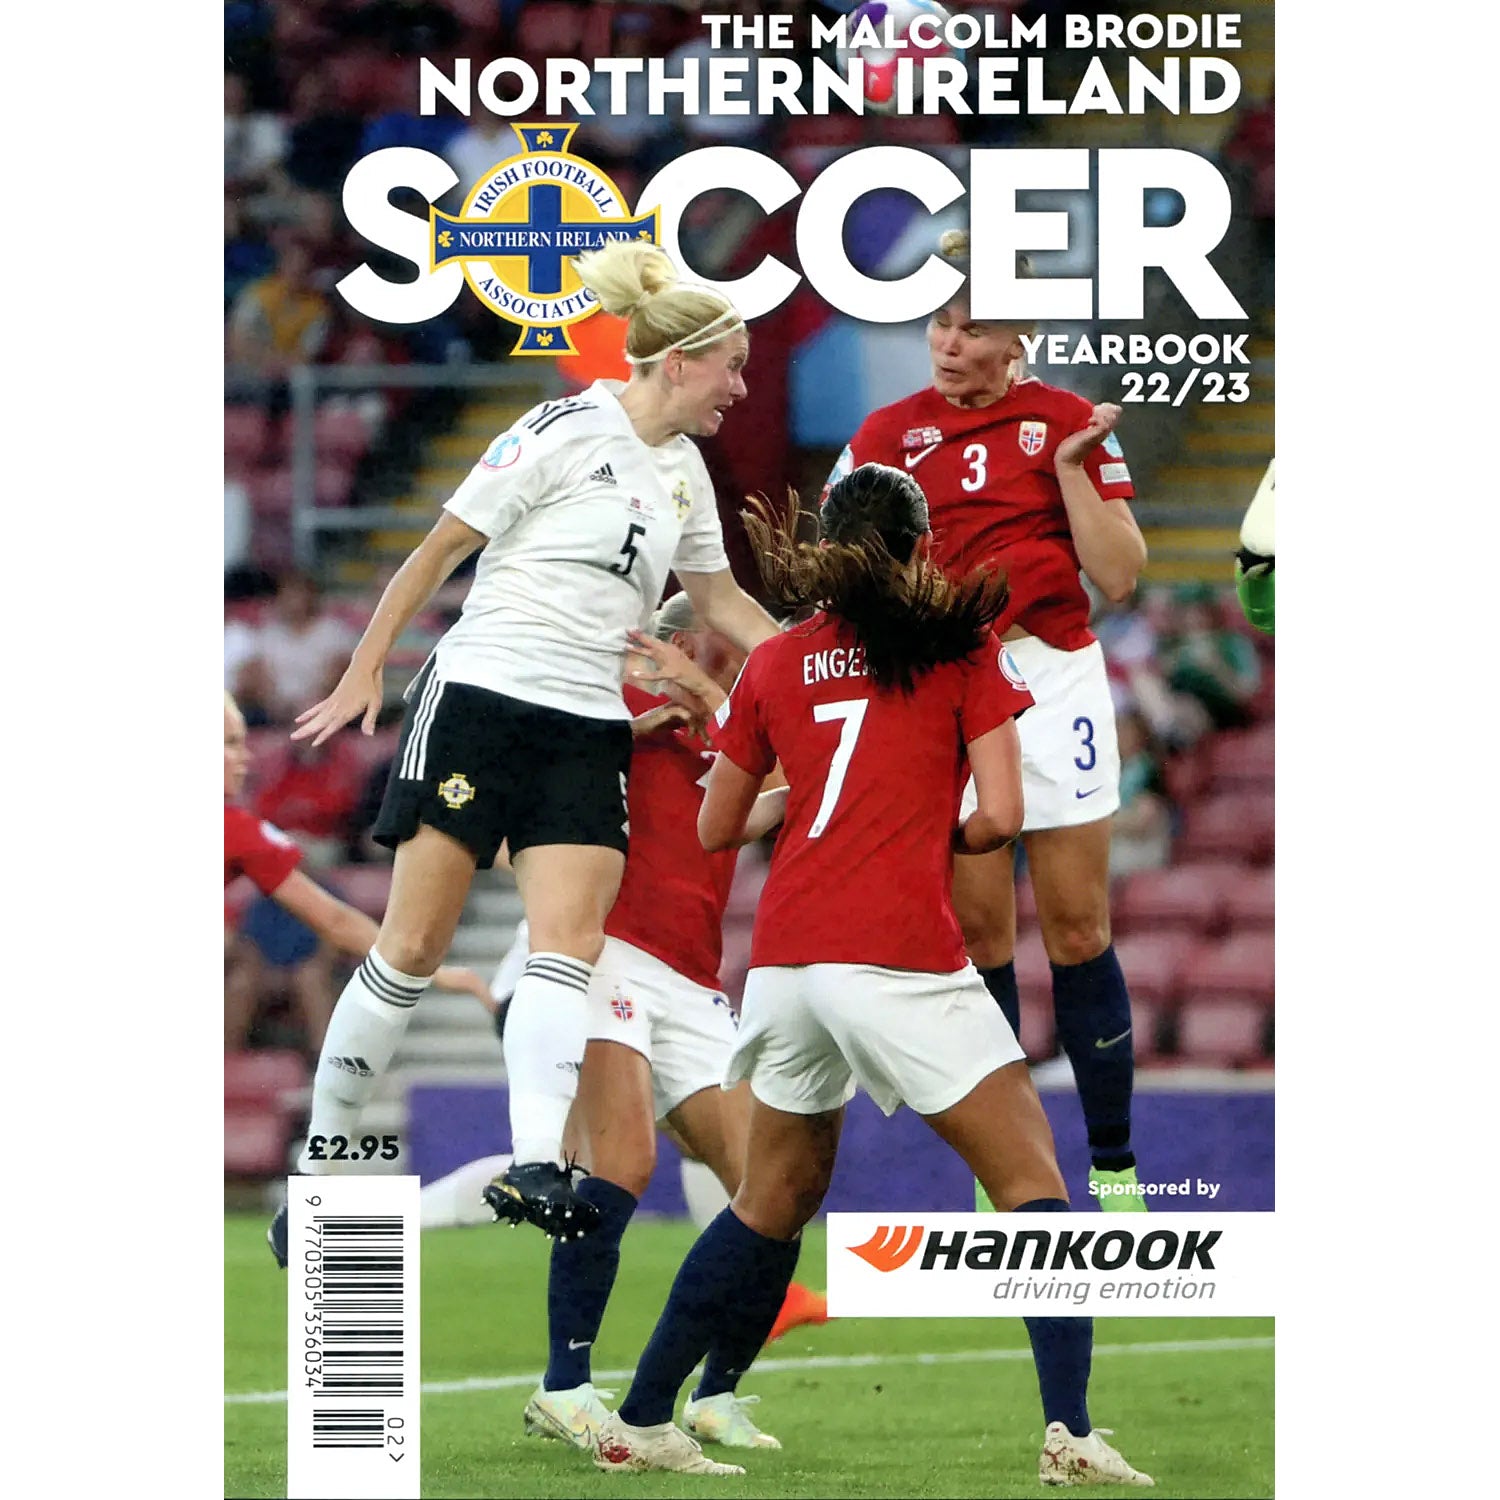 The Malcolm Brodie Northern Ireland Soccer Yearbook 22/23